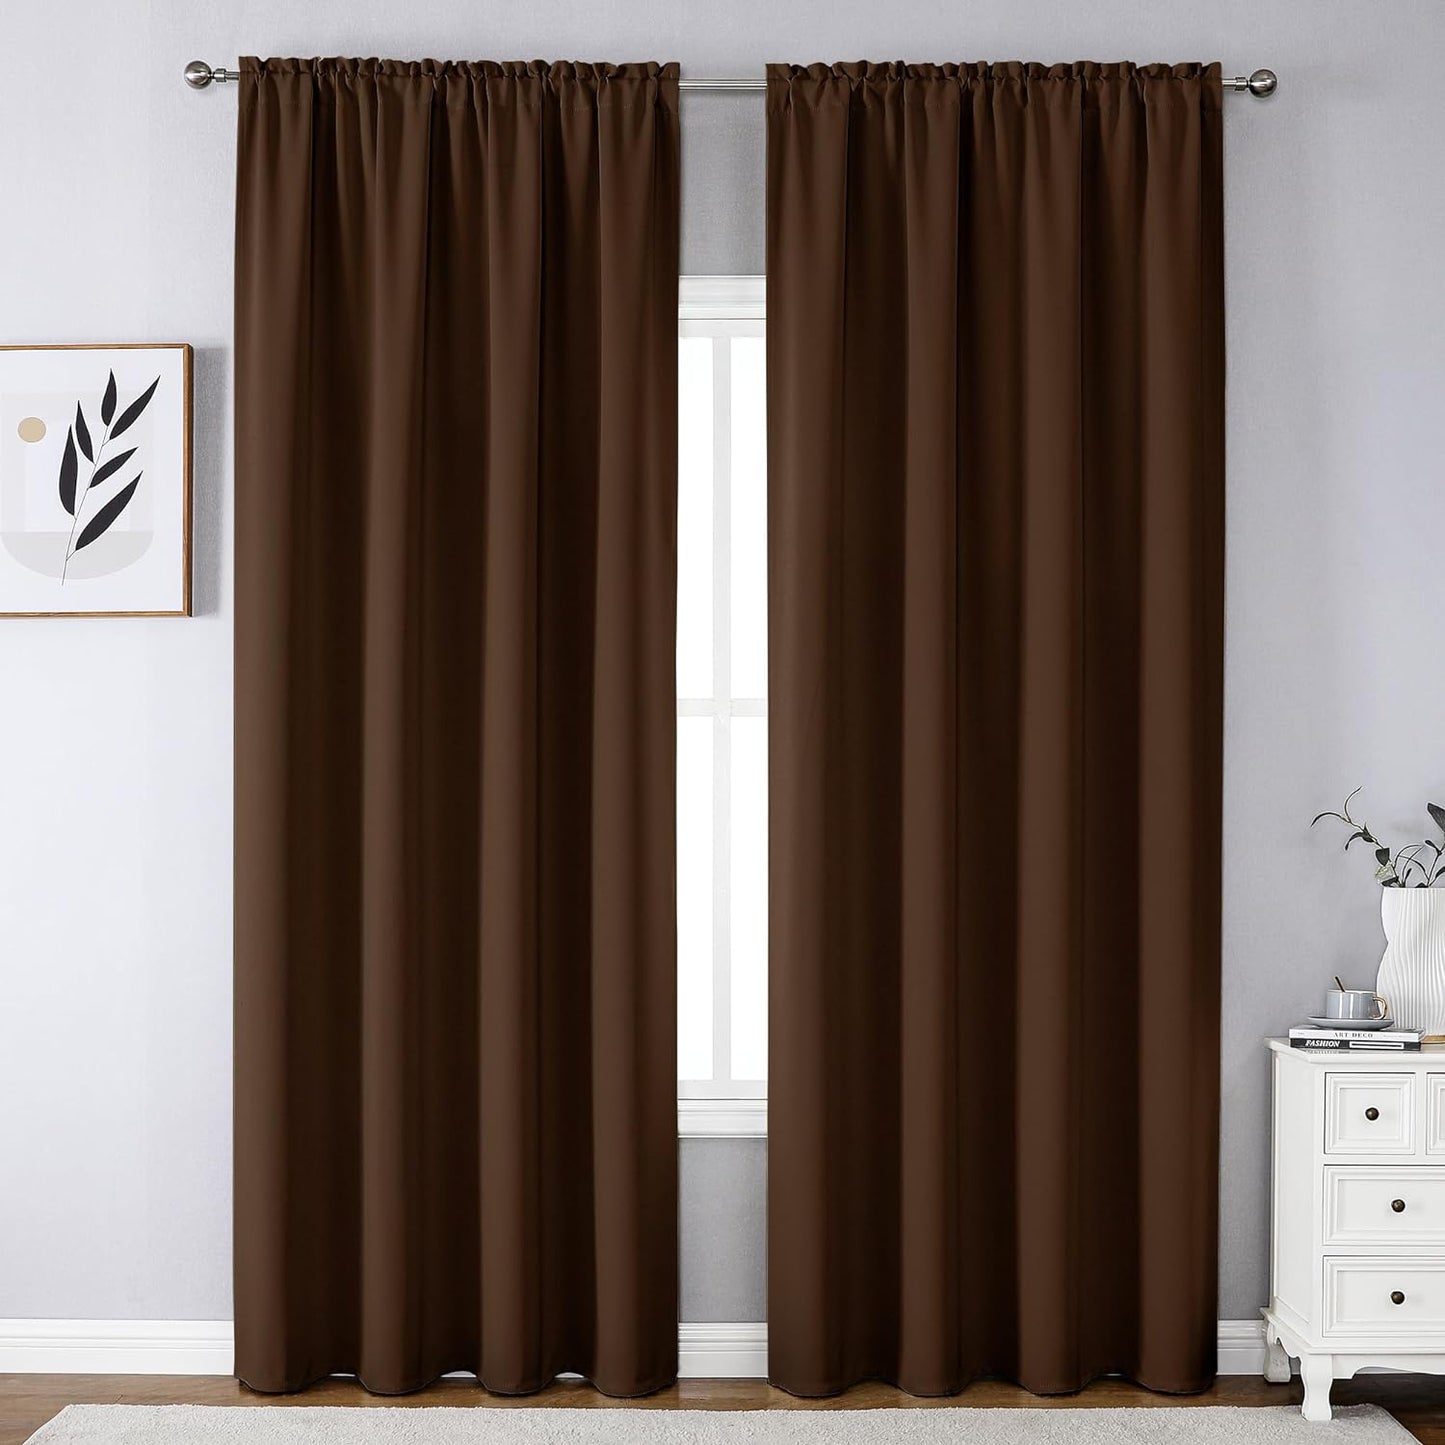 CUCRAF Blackout Curtains 84 Inches Long for Living Room, Light Beige Room Darkening Window Curtain Panels, Rod Pocket Thermal Insulated Solid Drapes for Bedroom, 52X84 Inch, Set of 2 Panels  CUCRAF Chocolate 52W X 108L Inch 2 Panels 